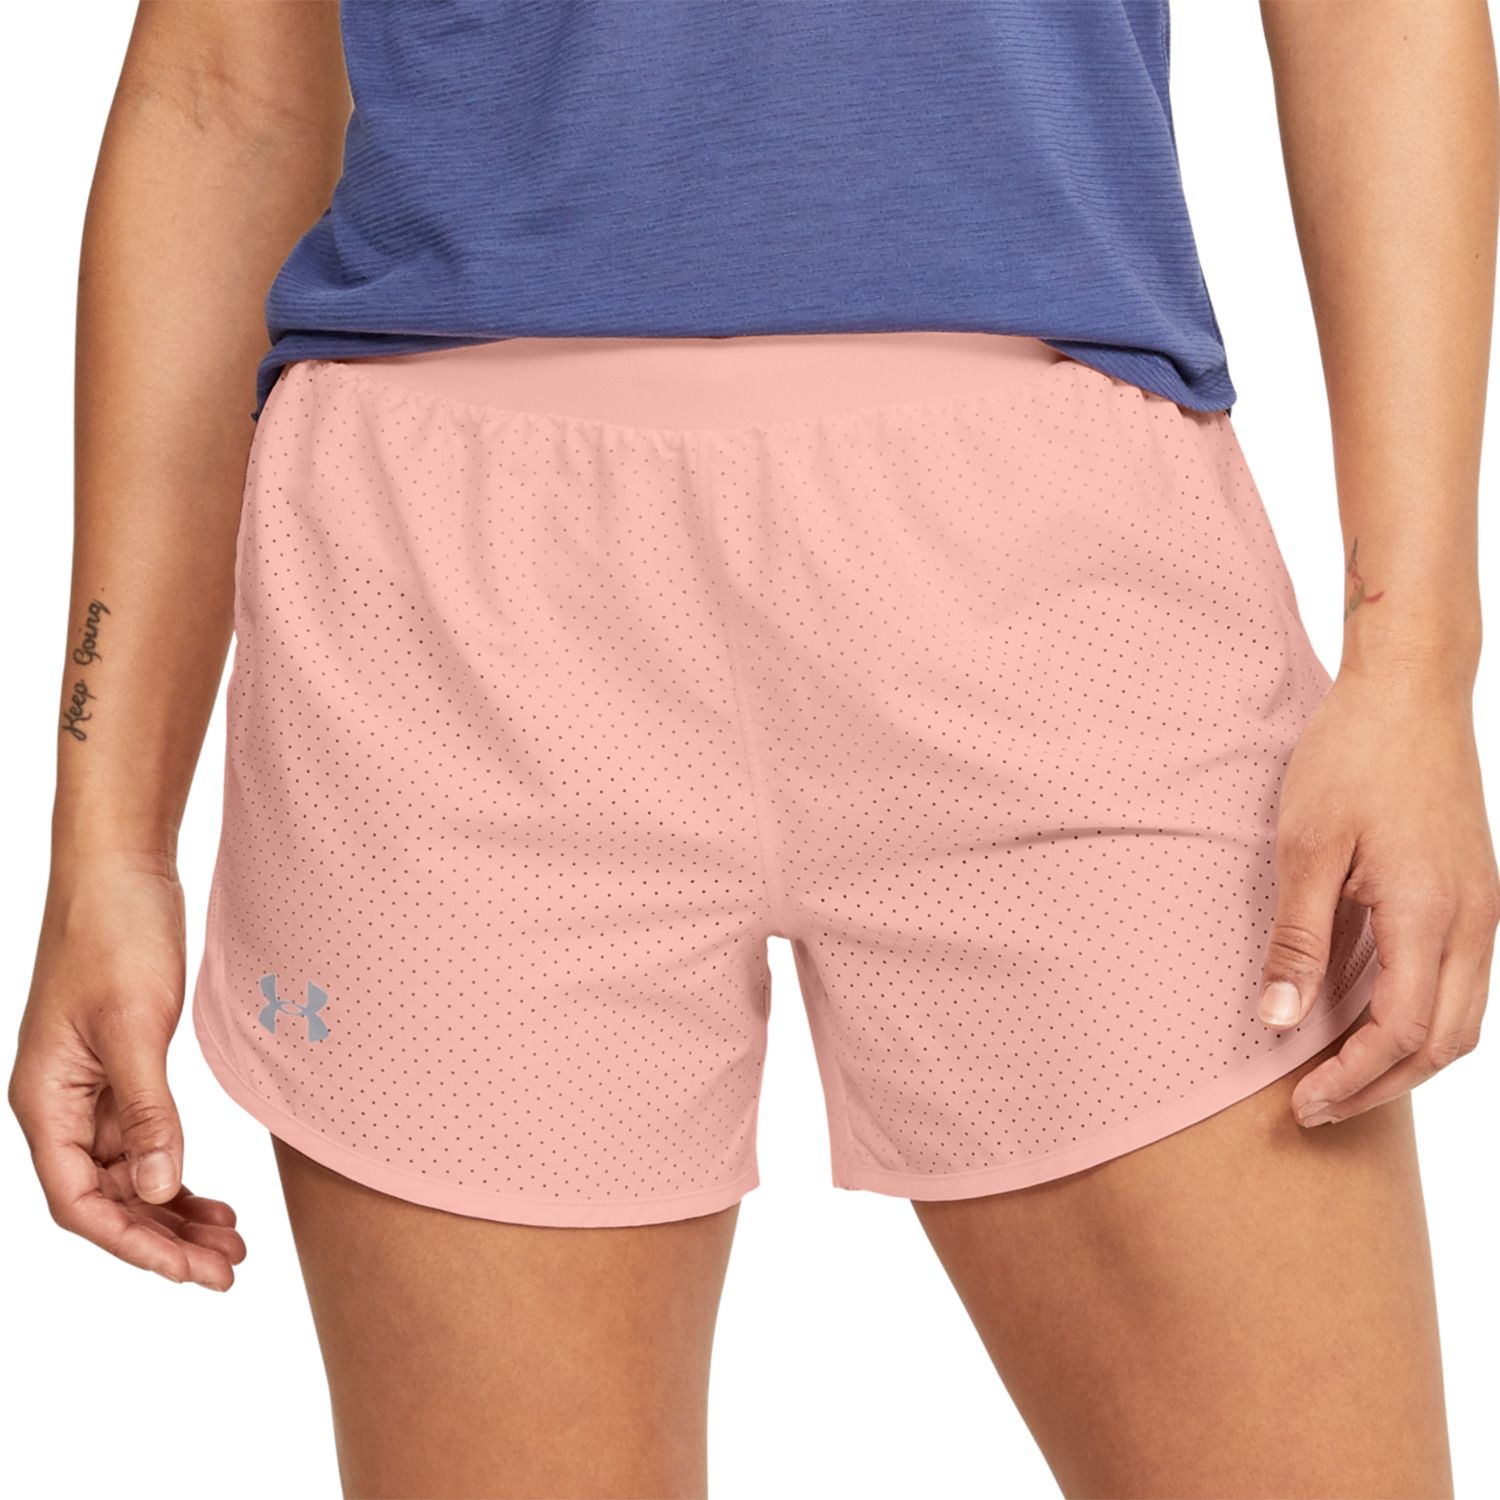 Women's Under Armour Shorts: Shop for 